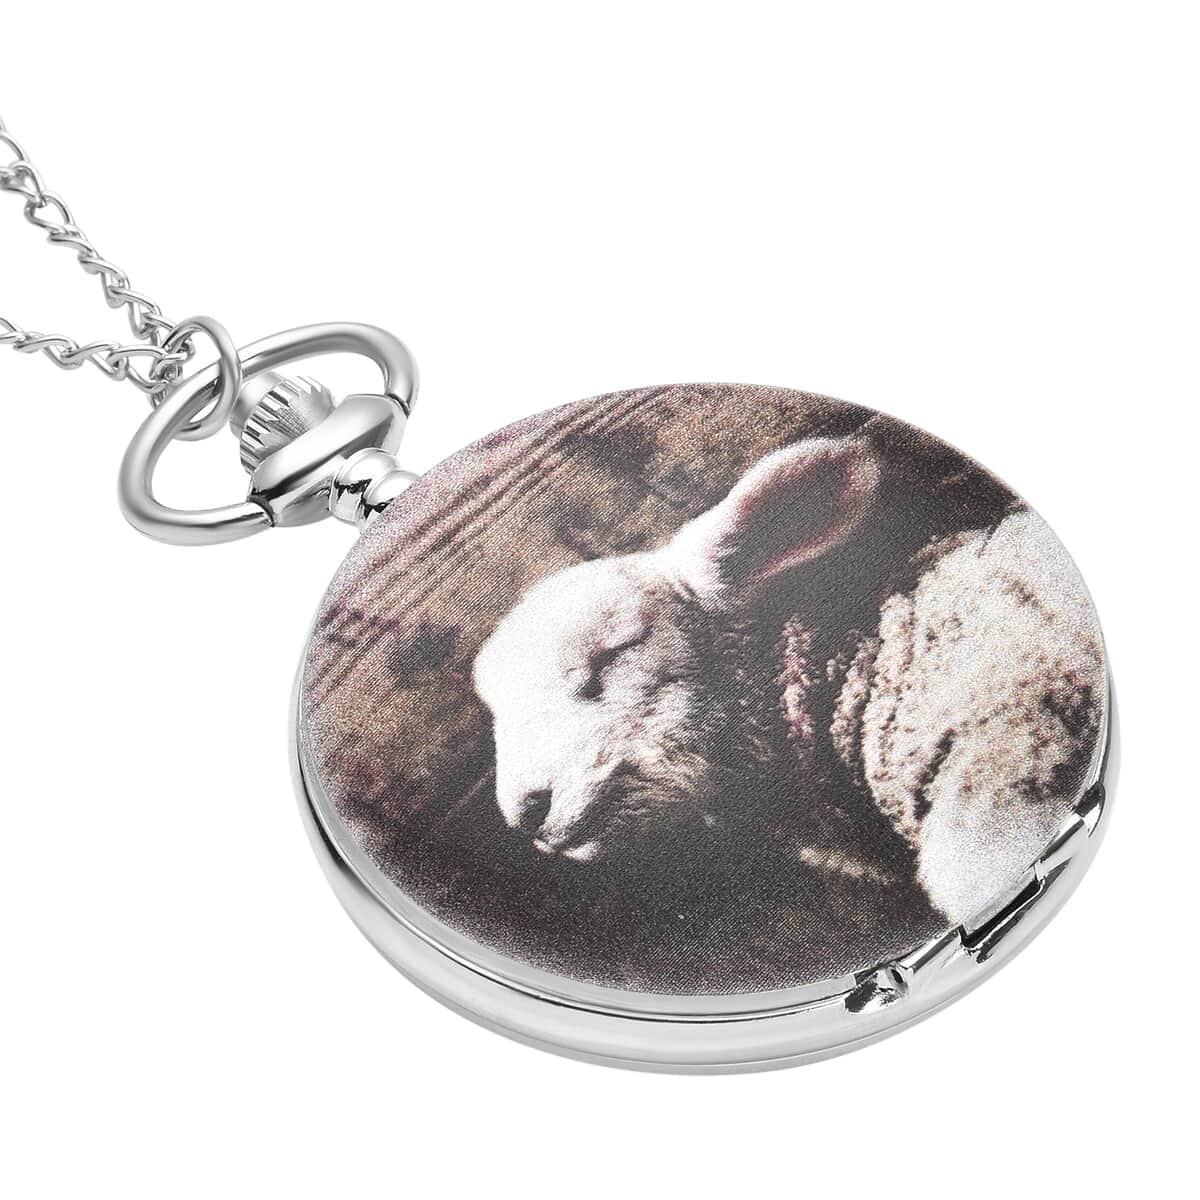 Strada Japanese Movement 3D Sheep Pattern Pocket Watch with Chain 31 Inches in Silvertone image number 2